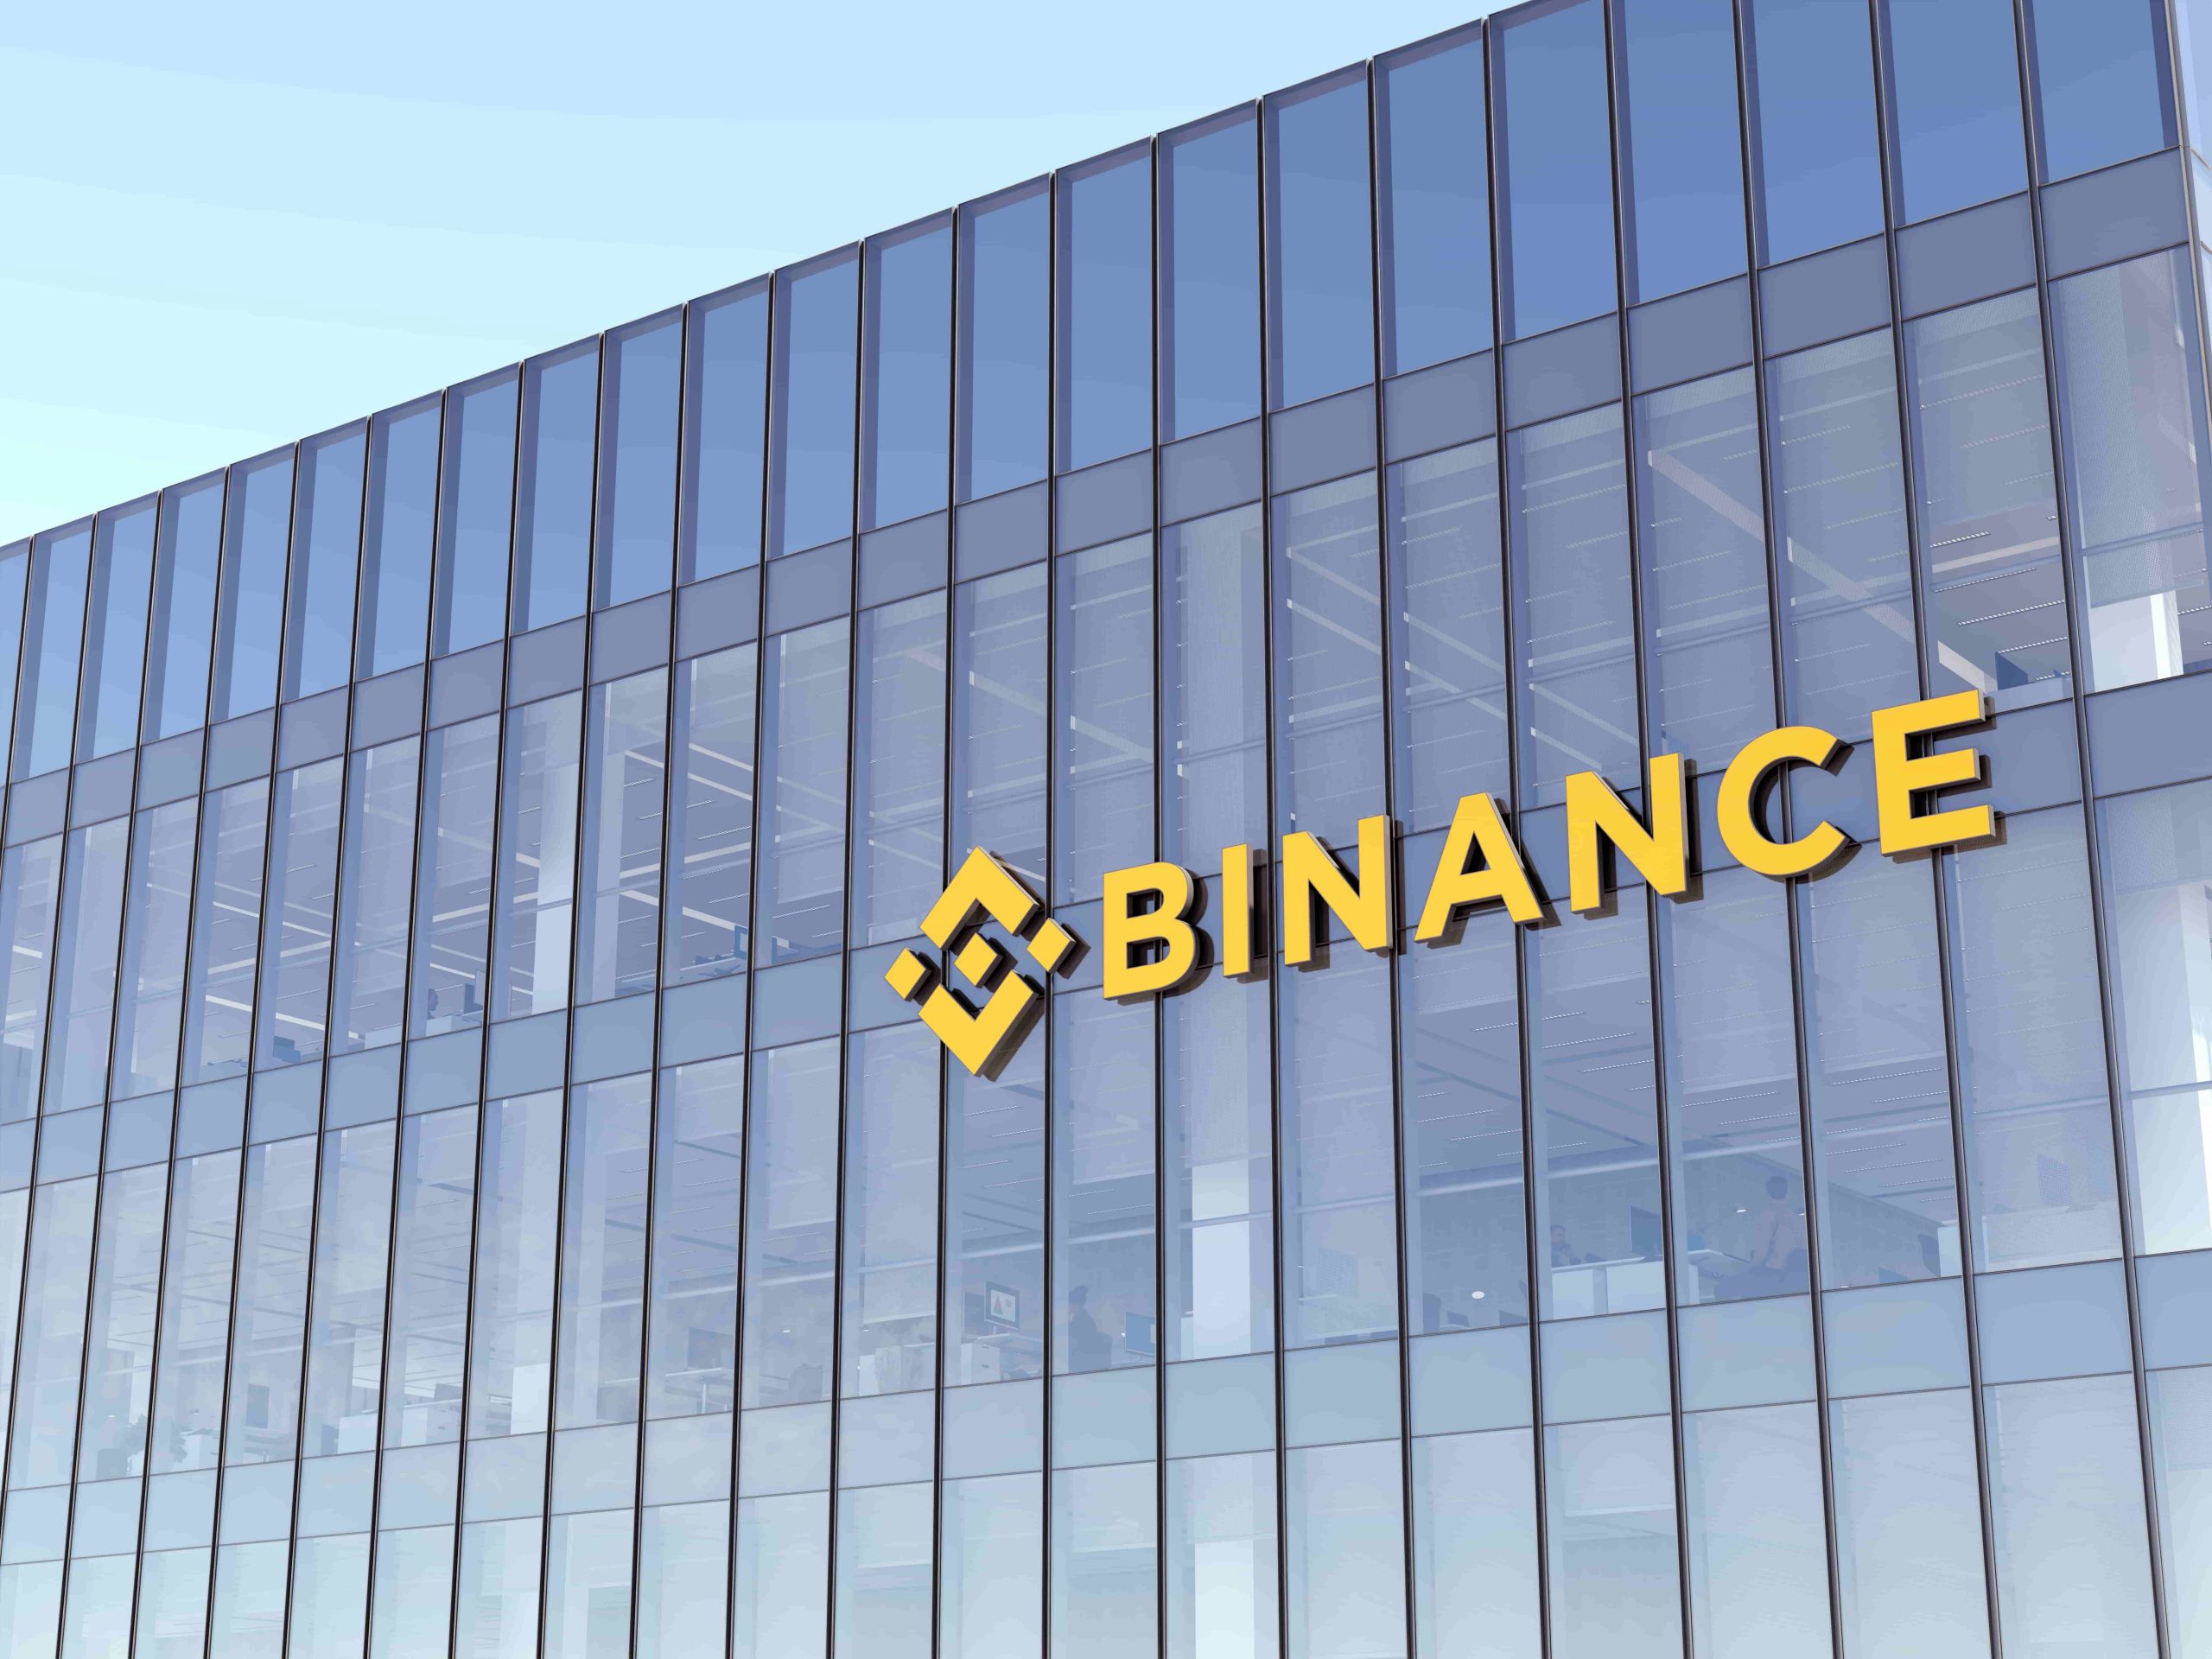 An image of a building with Binance's logo on it